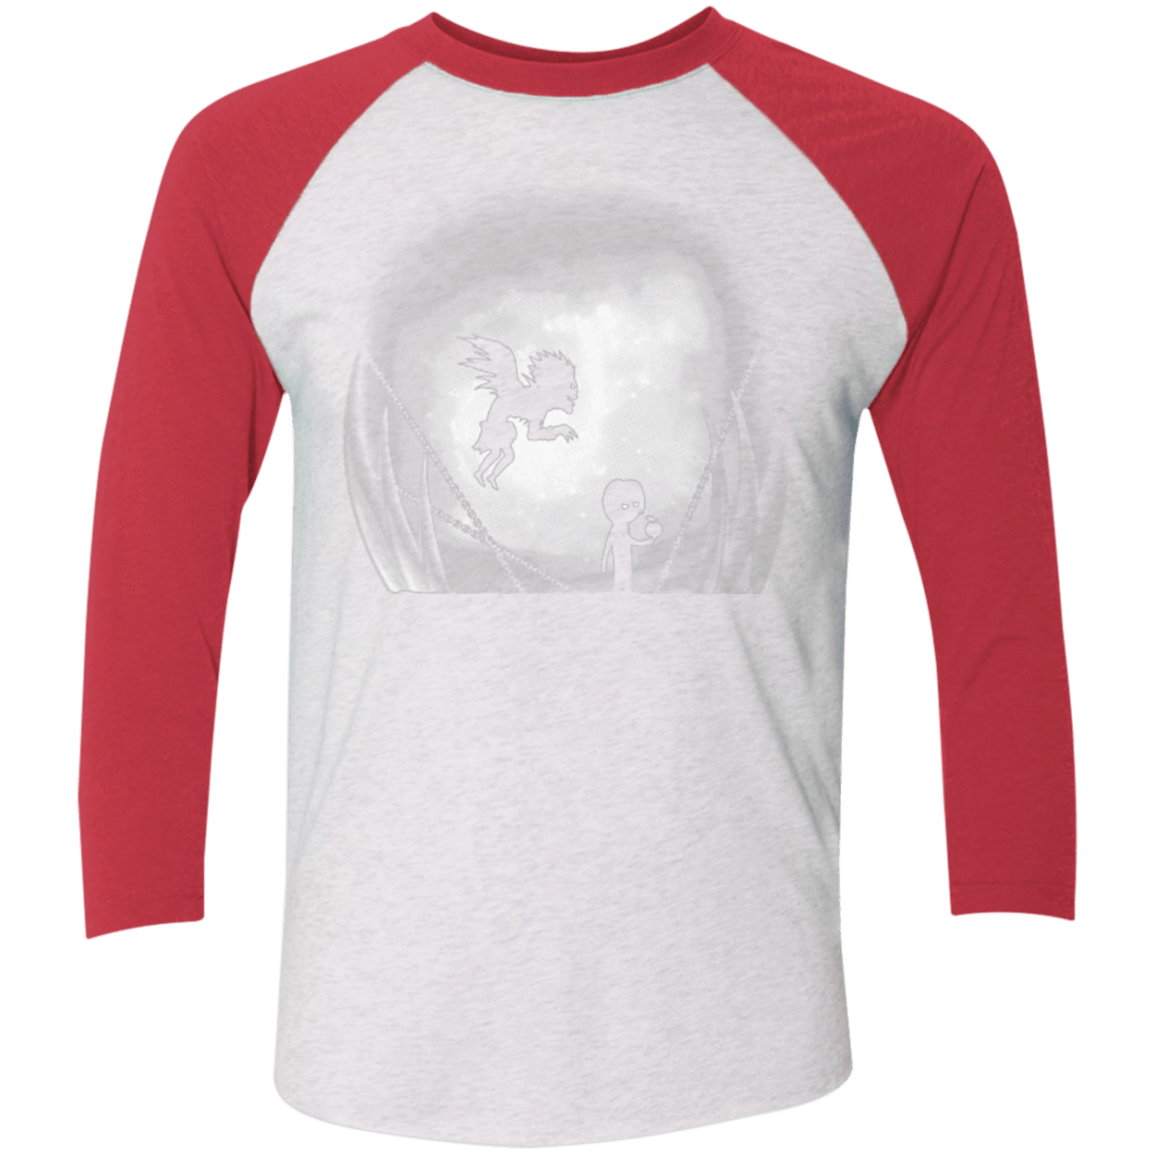 T-Shirts Heather White/Vintage Red / X-Small Light in Limbo Men's Triblend 3/4 Sleeve